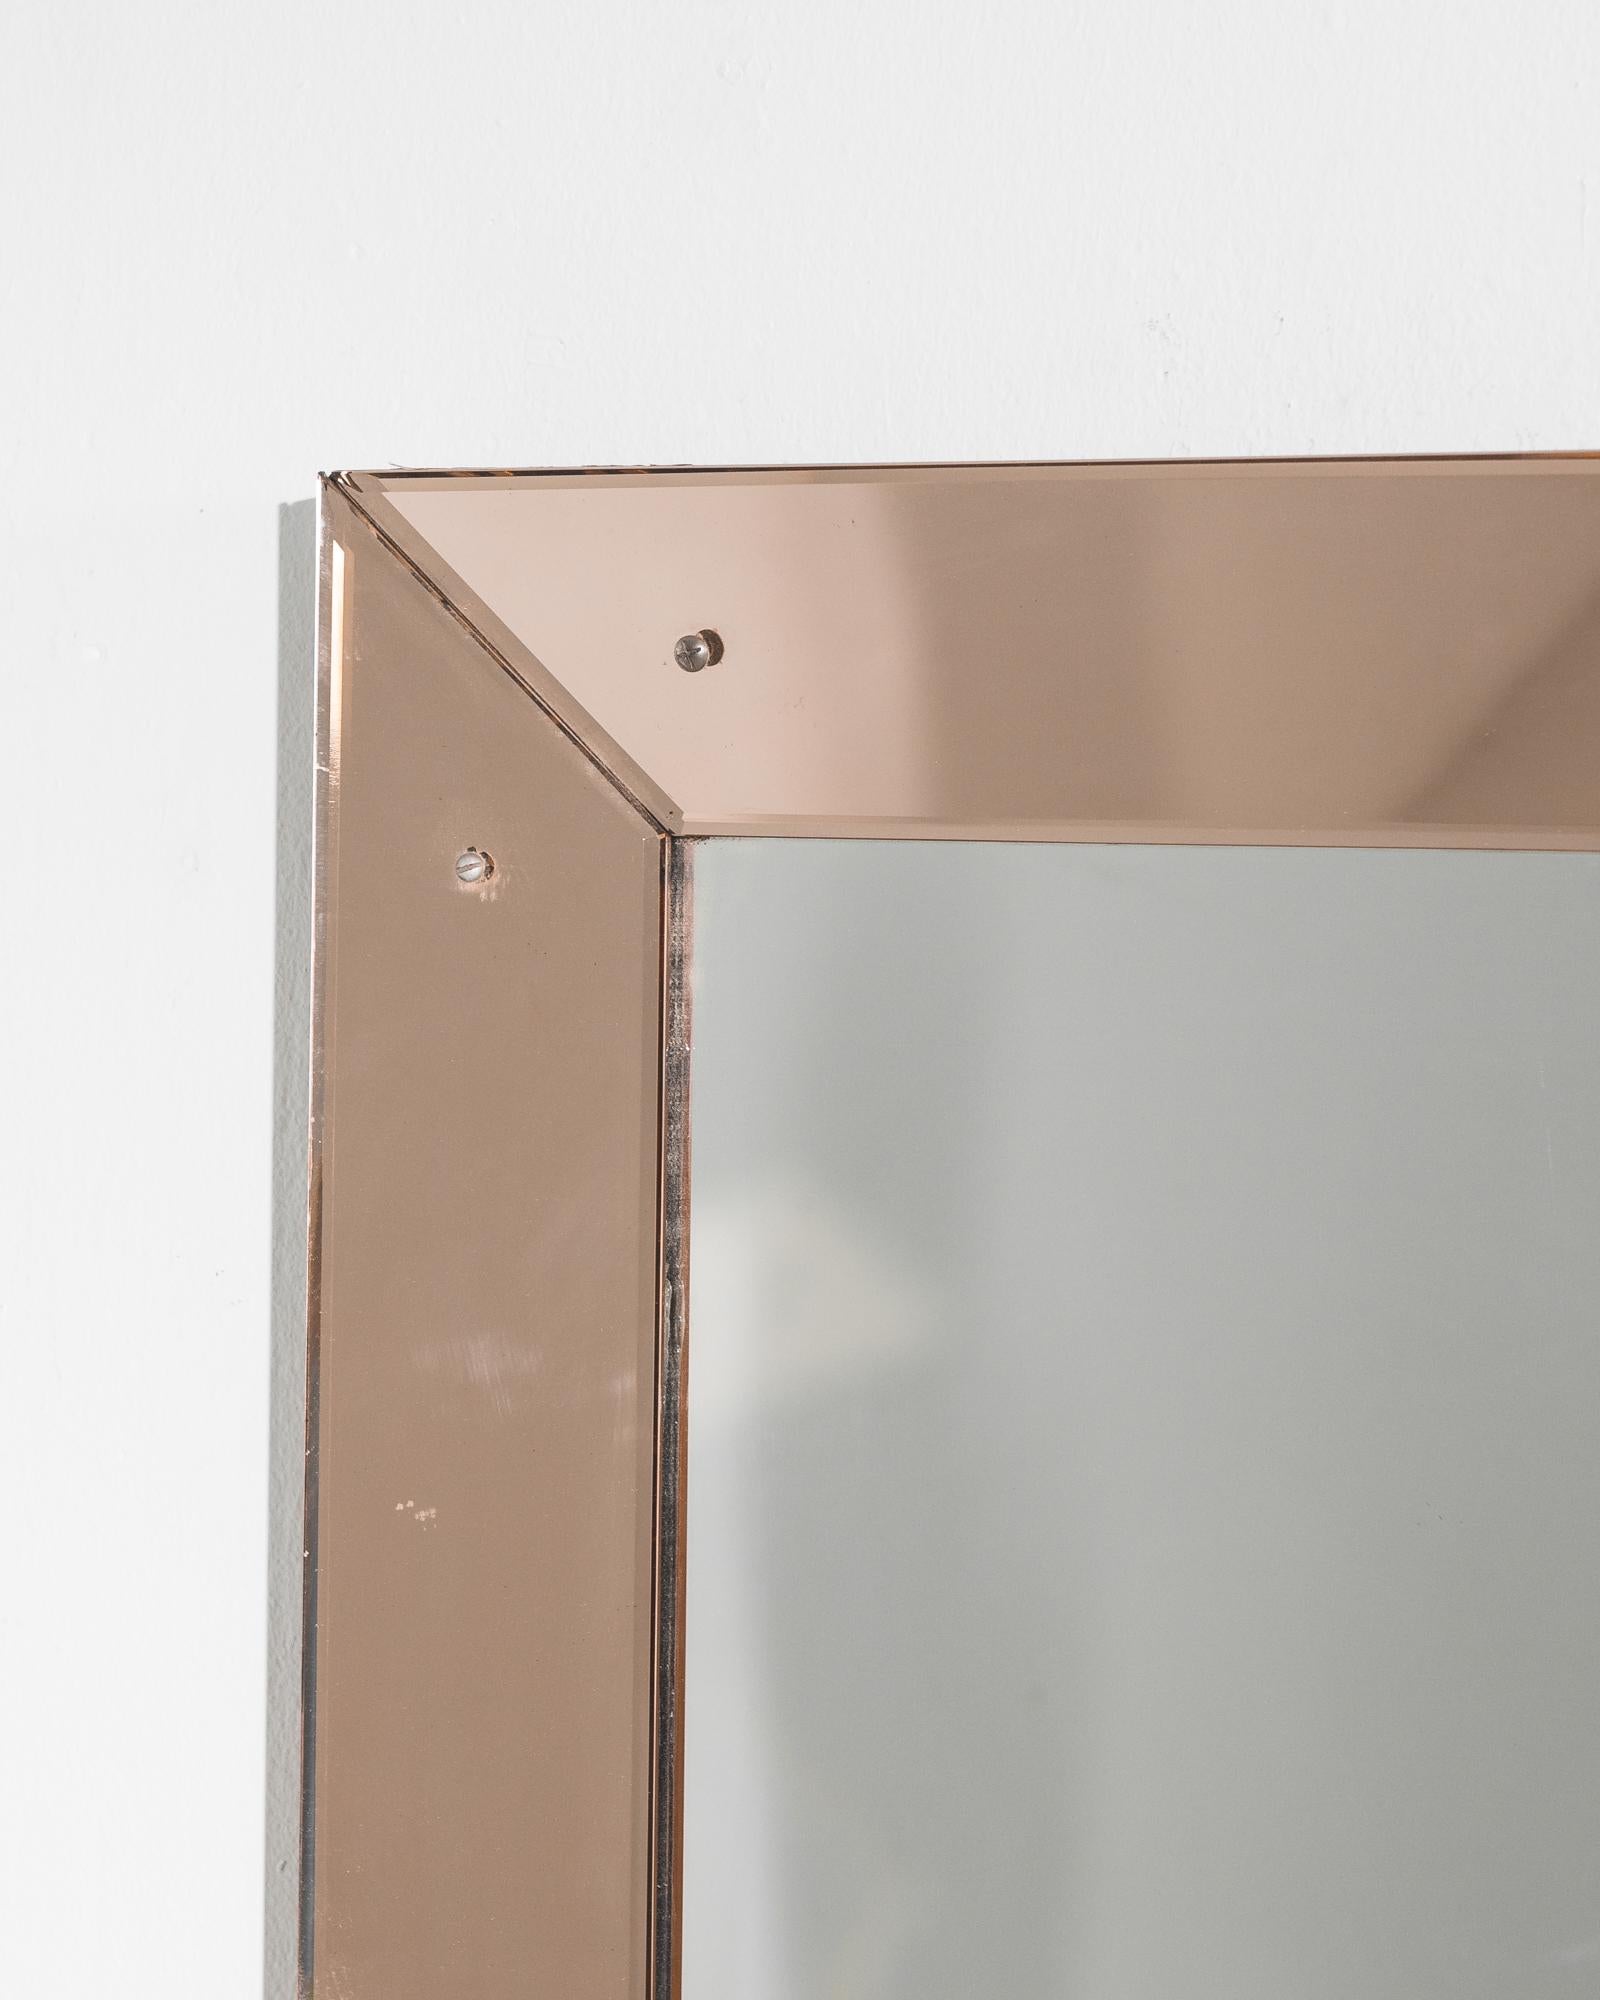 This glass frame mirror was crafted in Italy, circa 1930. Updated with a new mirror in our atelier, the beveled frame displays an elegant rose tint and an immaculate sheen. The cleanness of the lines exhibit the glamor and style innate to the